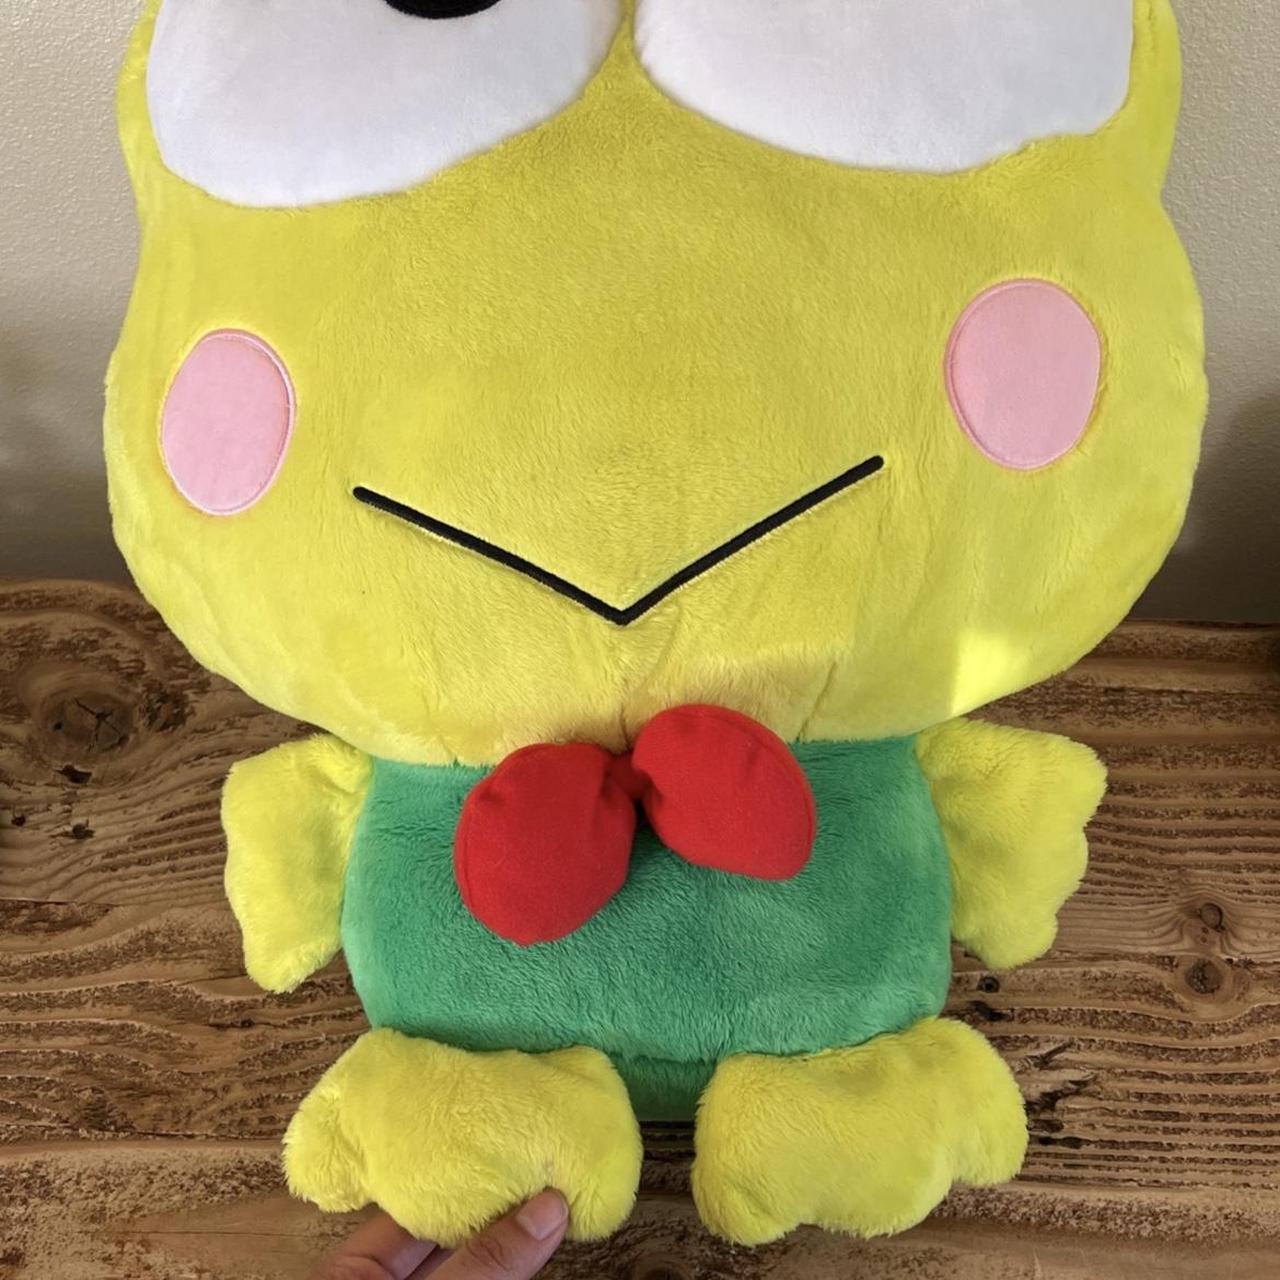 Large Sanrio Keroppi Plush - tags attached. Small